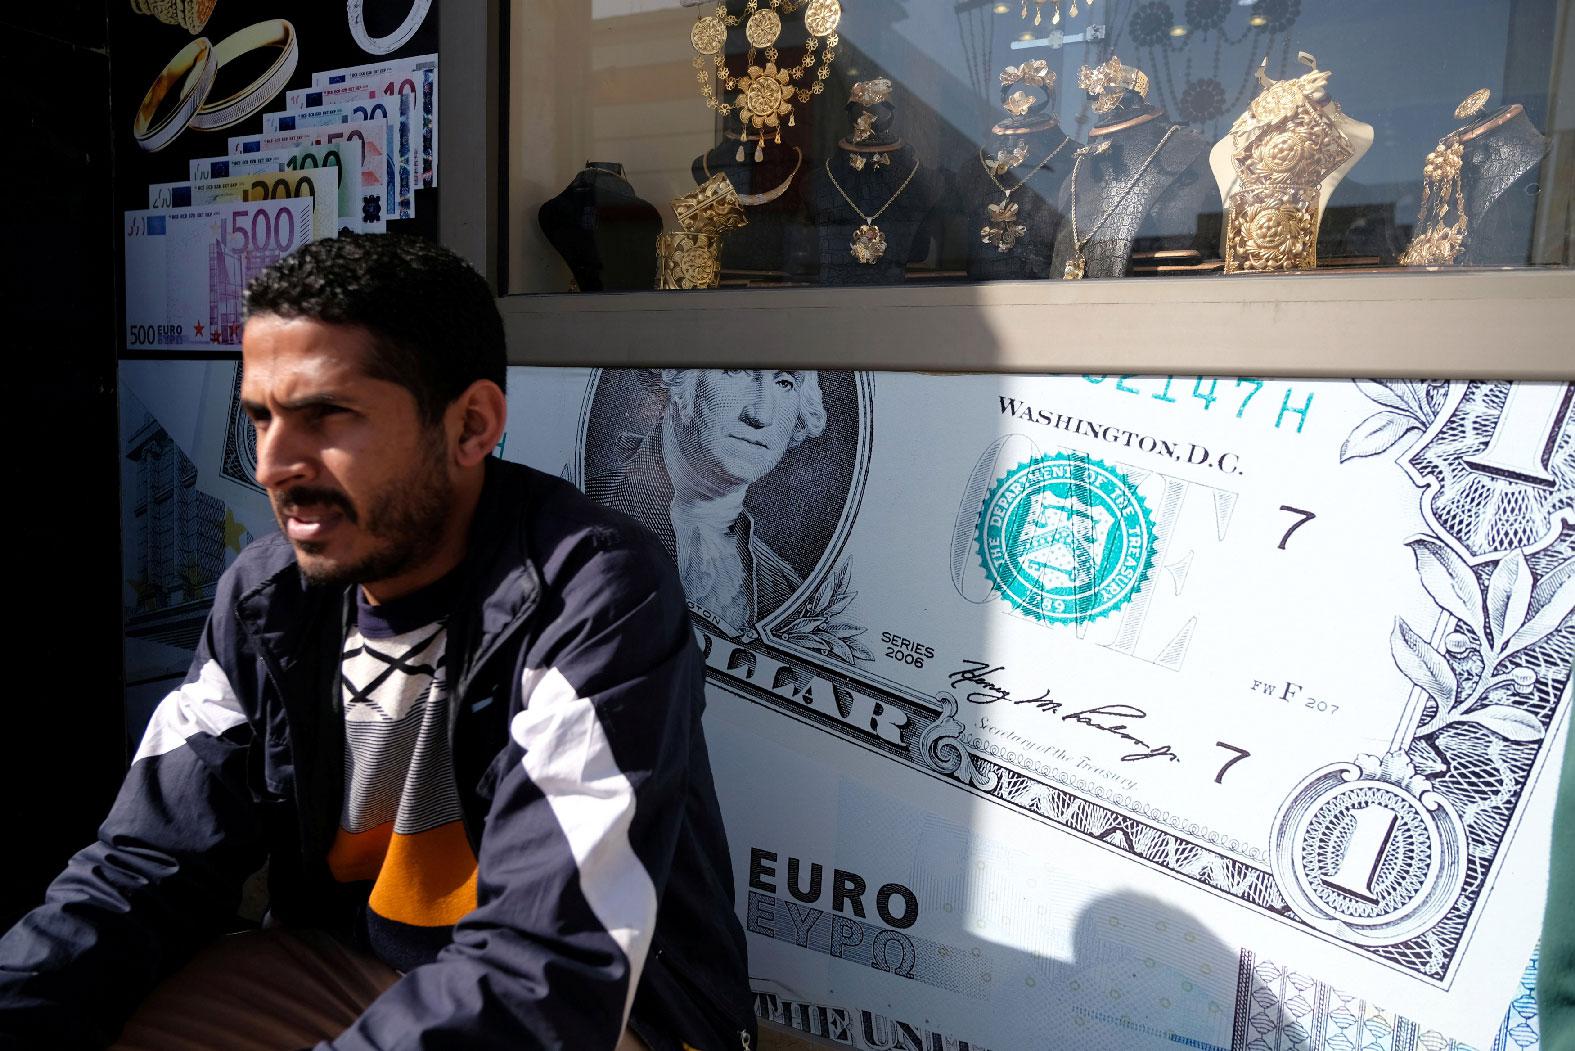 A man sits next to a gold shop and a currency exchange in Benghazi, Libya February 4, 2019.